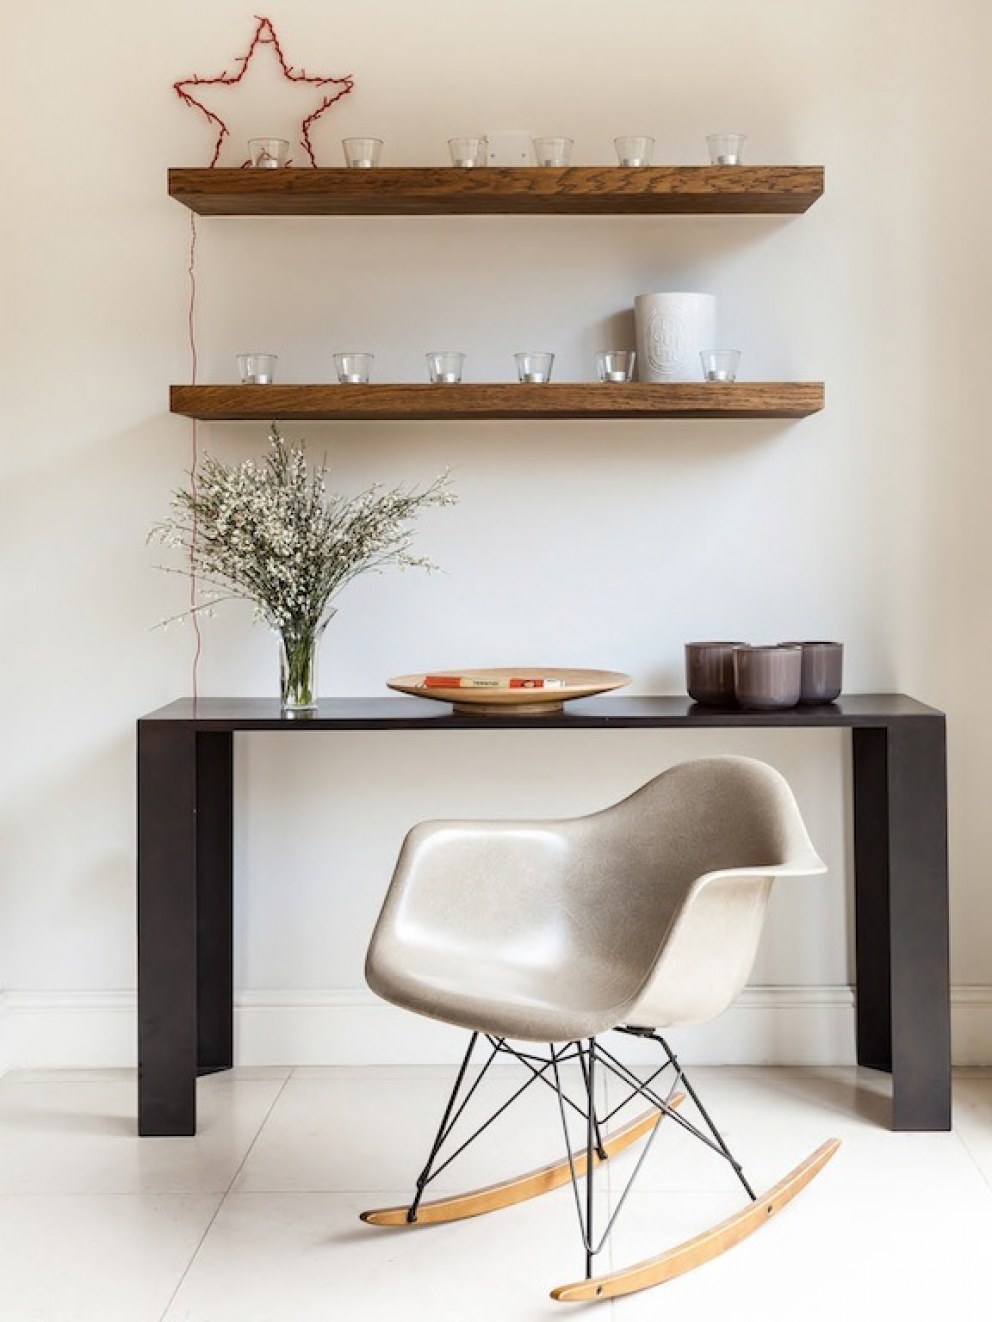 Lion house - Fulham | Feature wall with Eames chair | Interior Designers